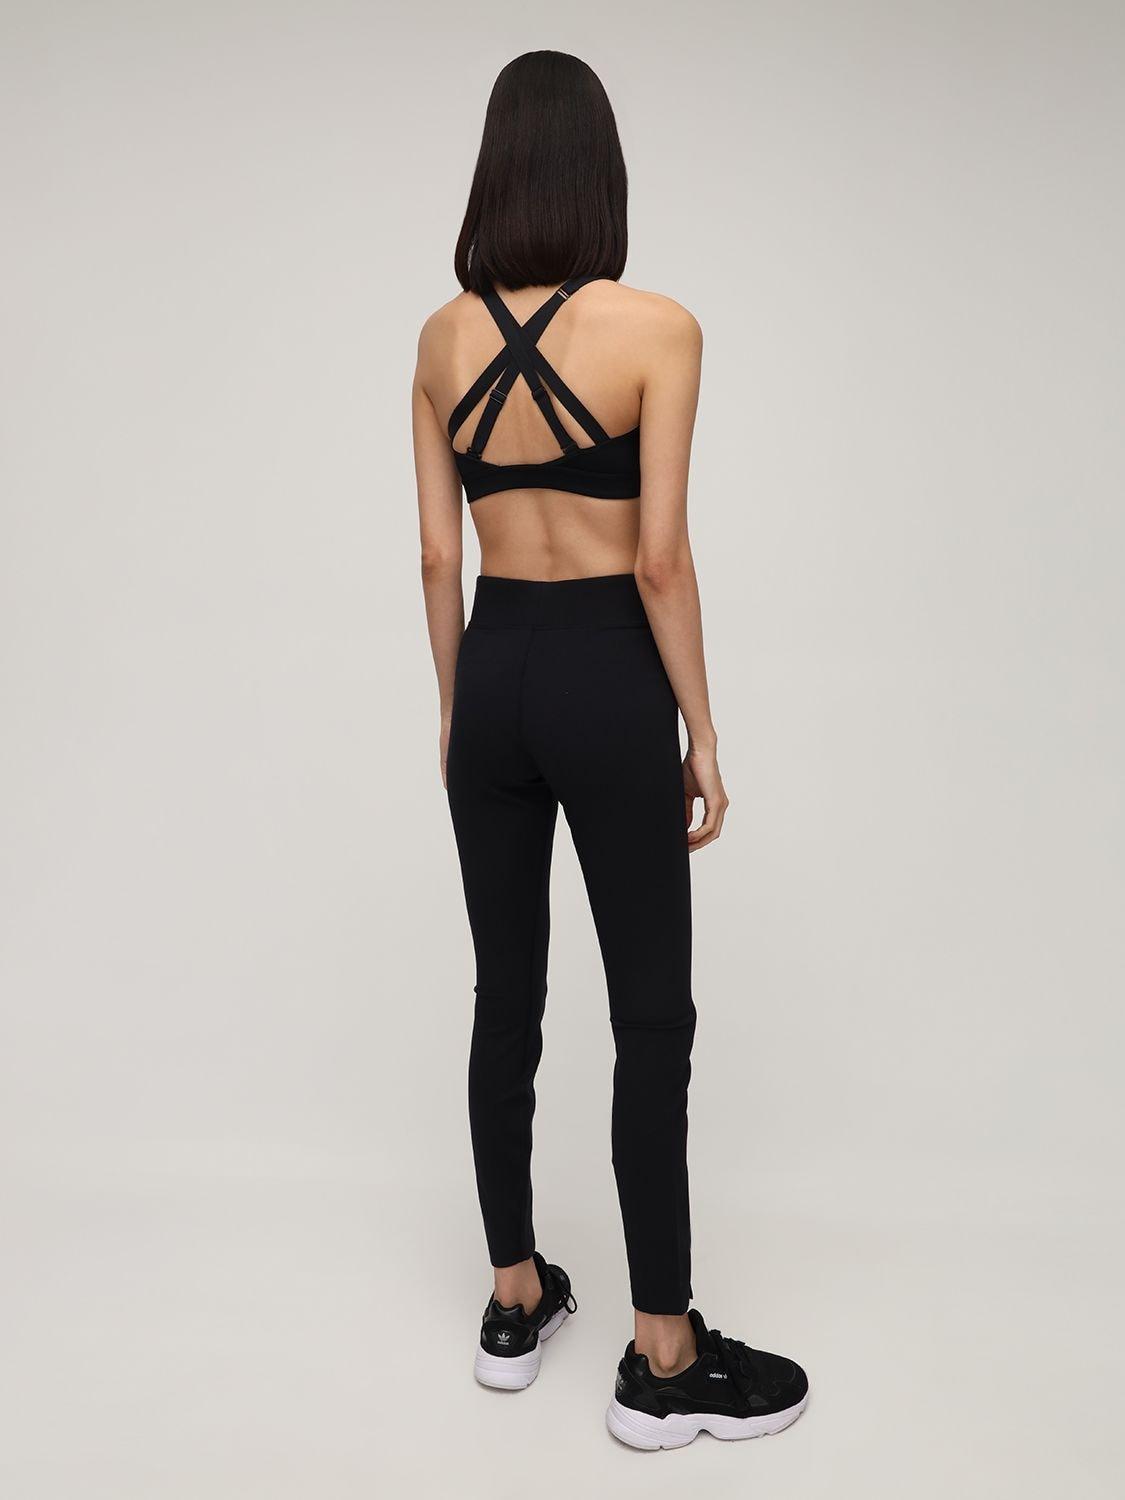 Nike Impact Strappy High Support Sports Bra in Black